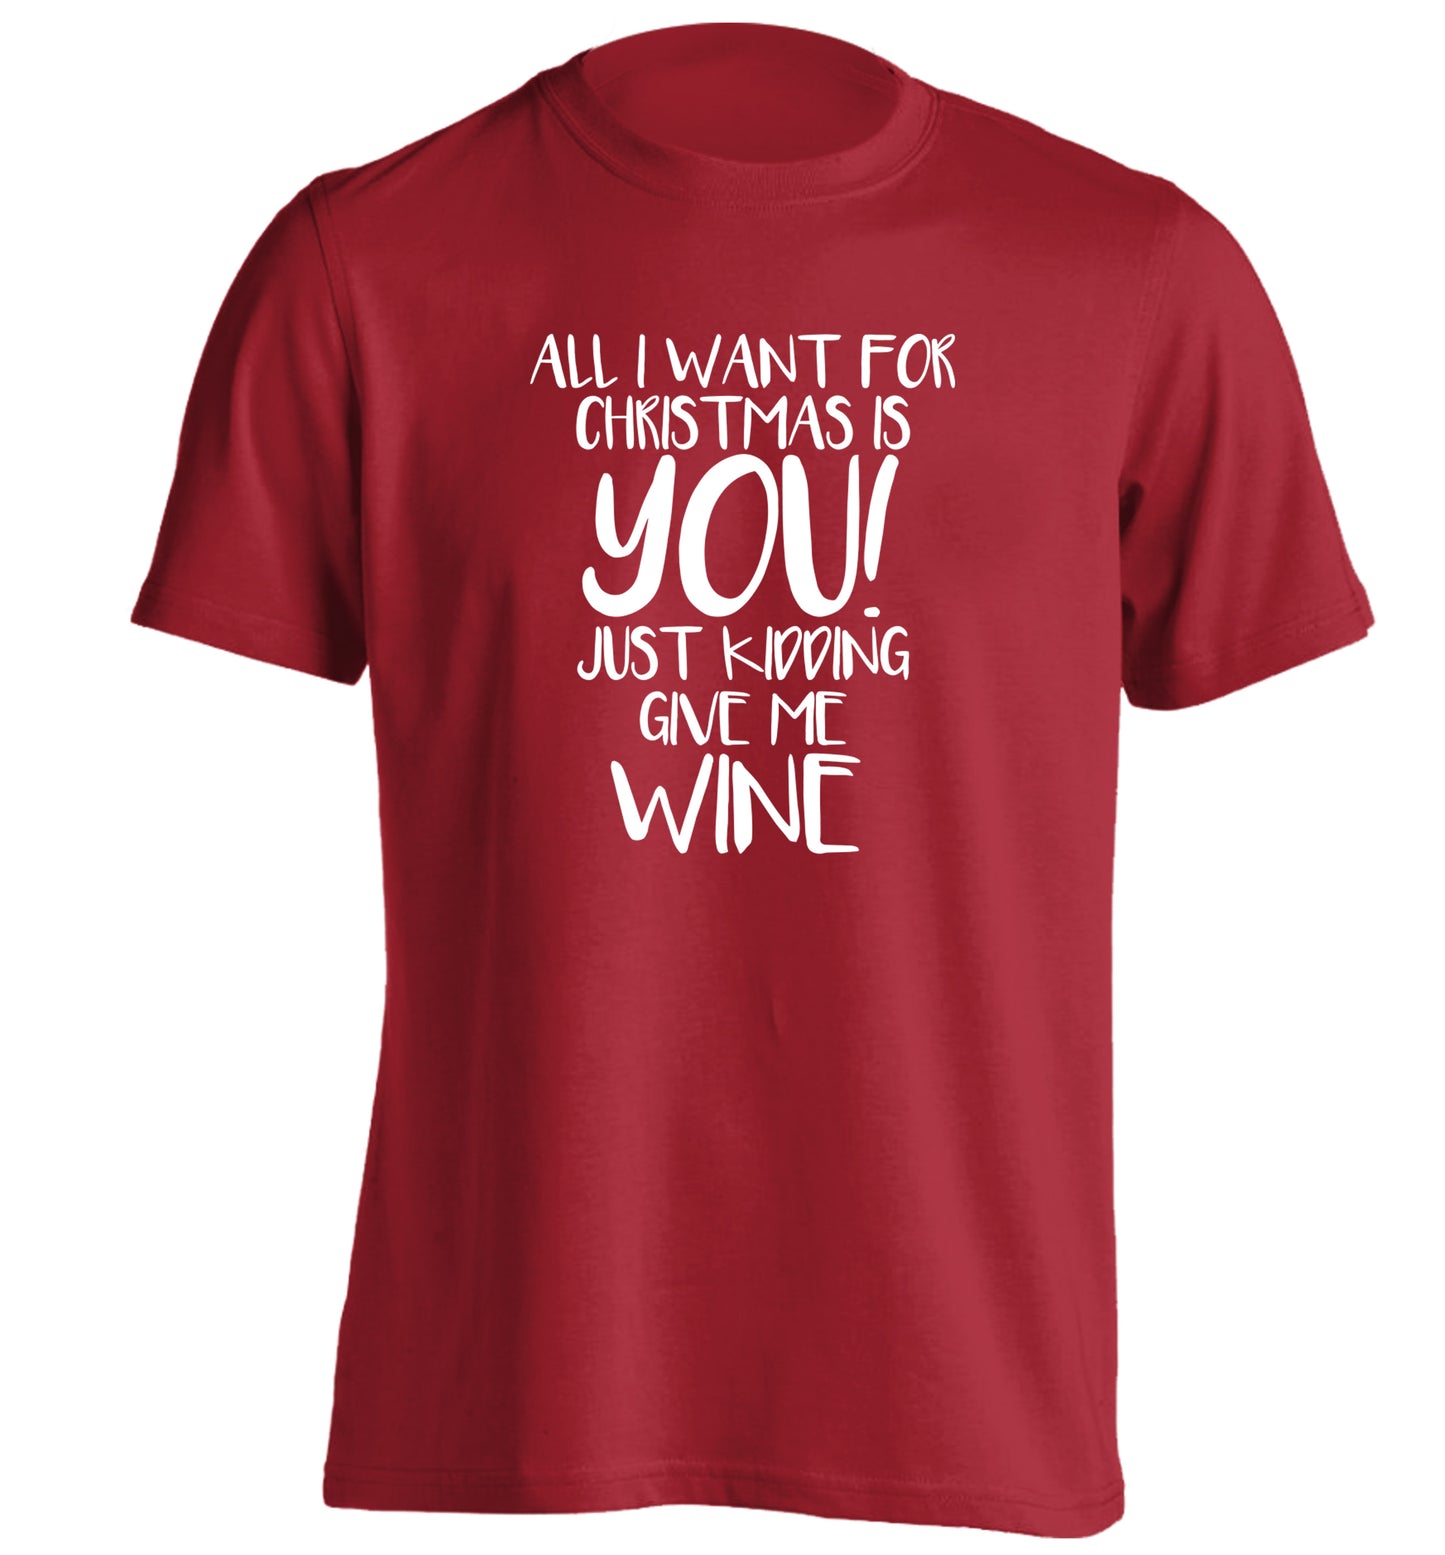 All I want for christmas is you just kidding give me the wine adults unisex red Tshirt 2XL